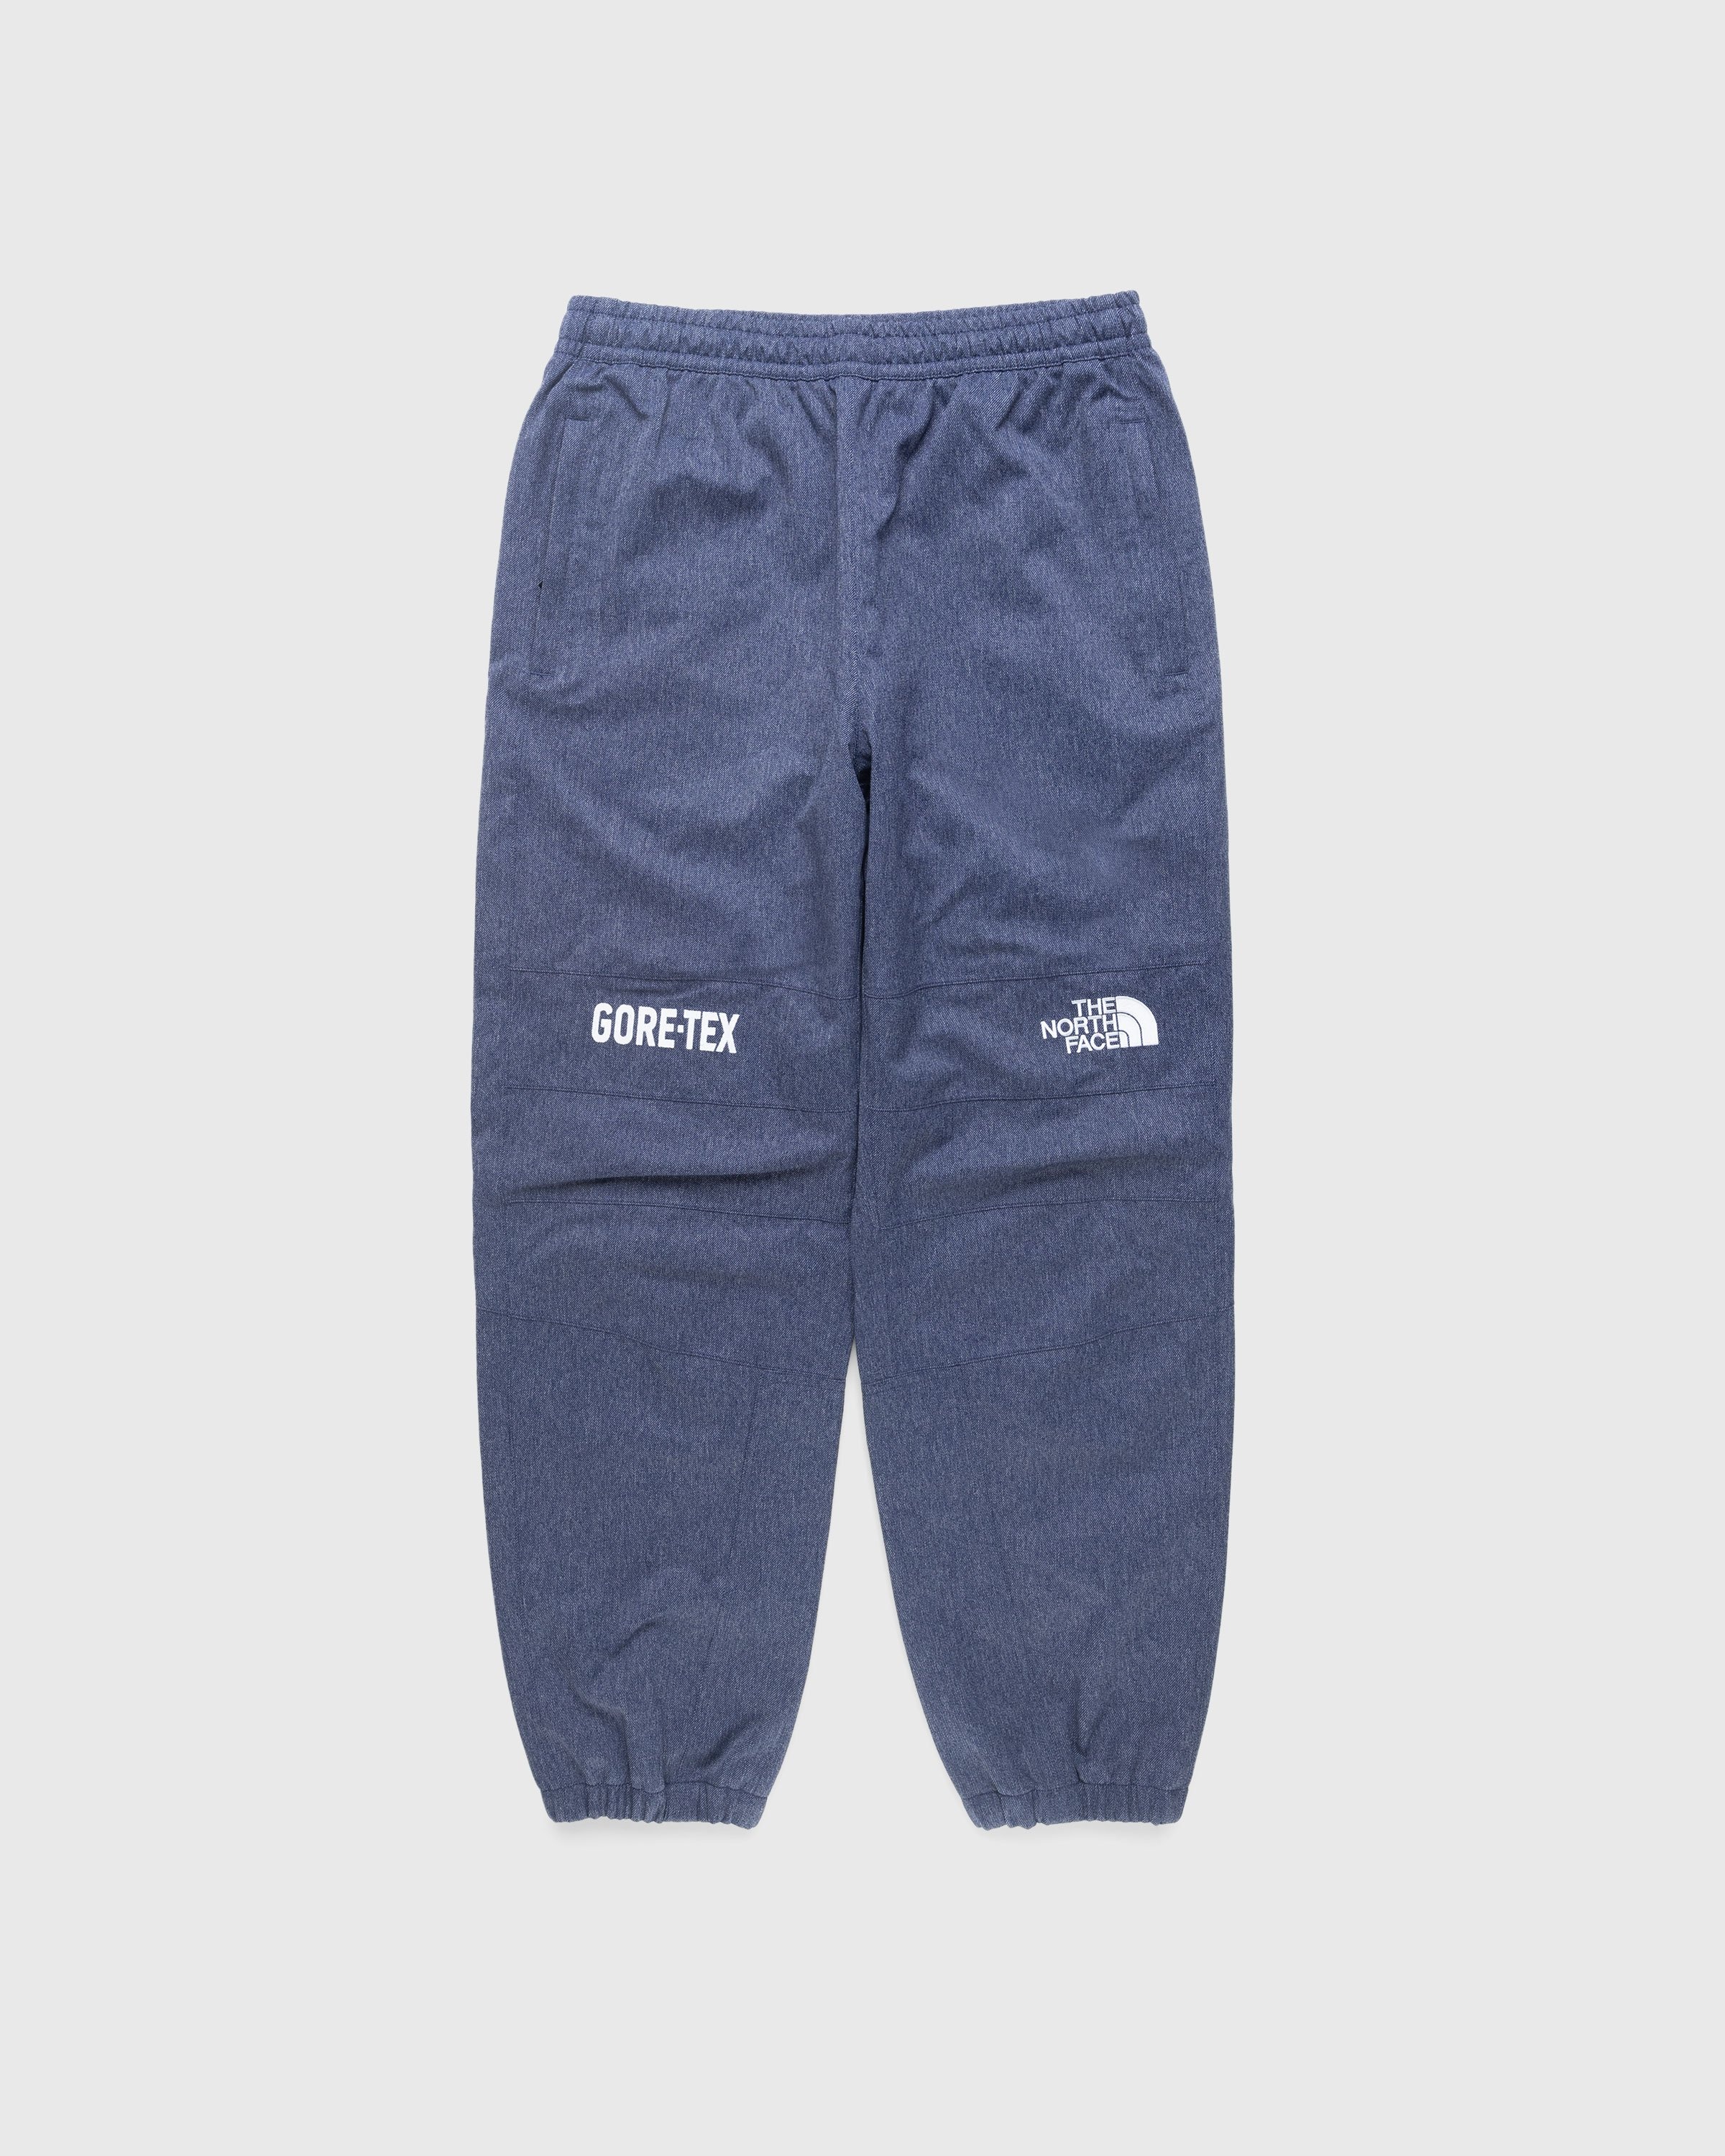 The North Face – Gore-Tex Mountain Pant Blue | Highsnobiety Shop